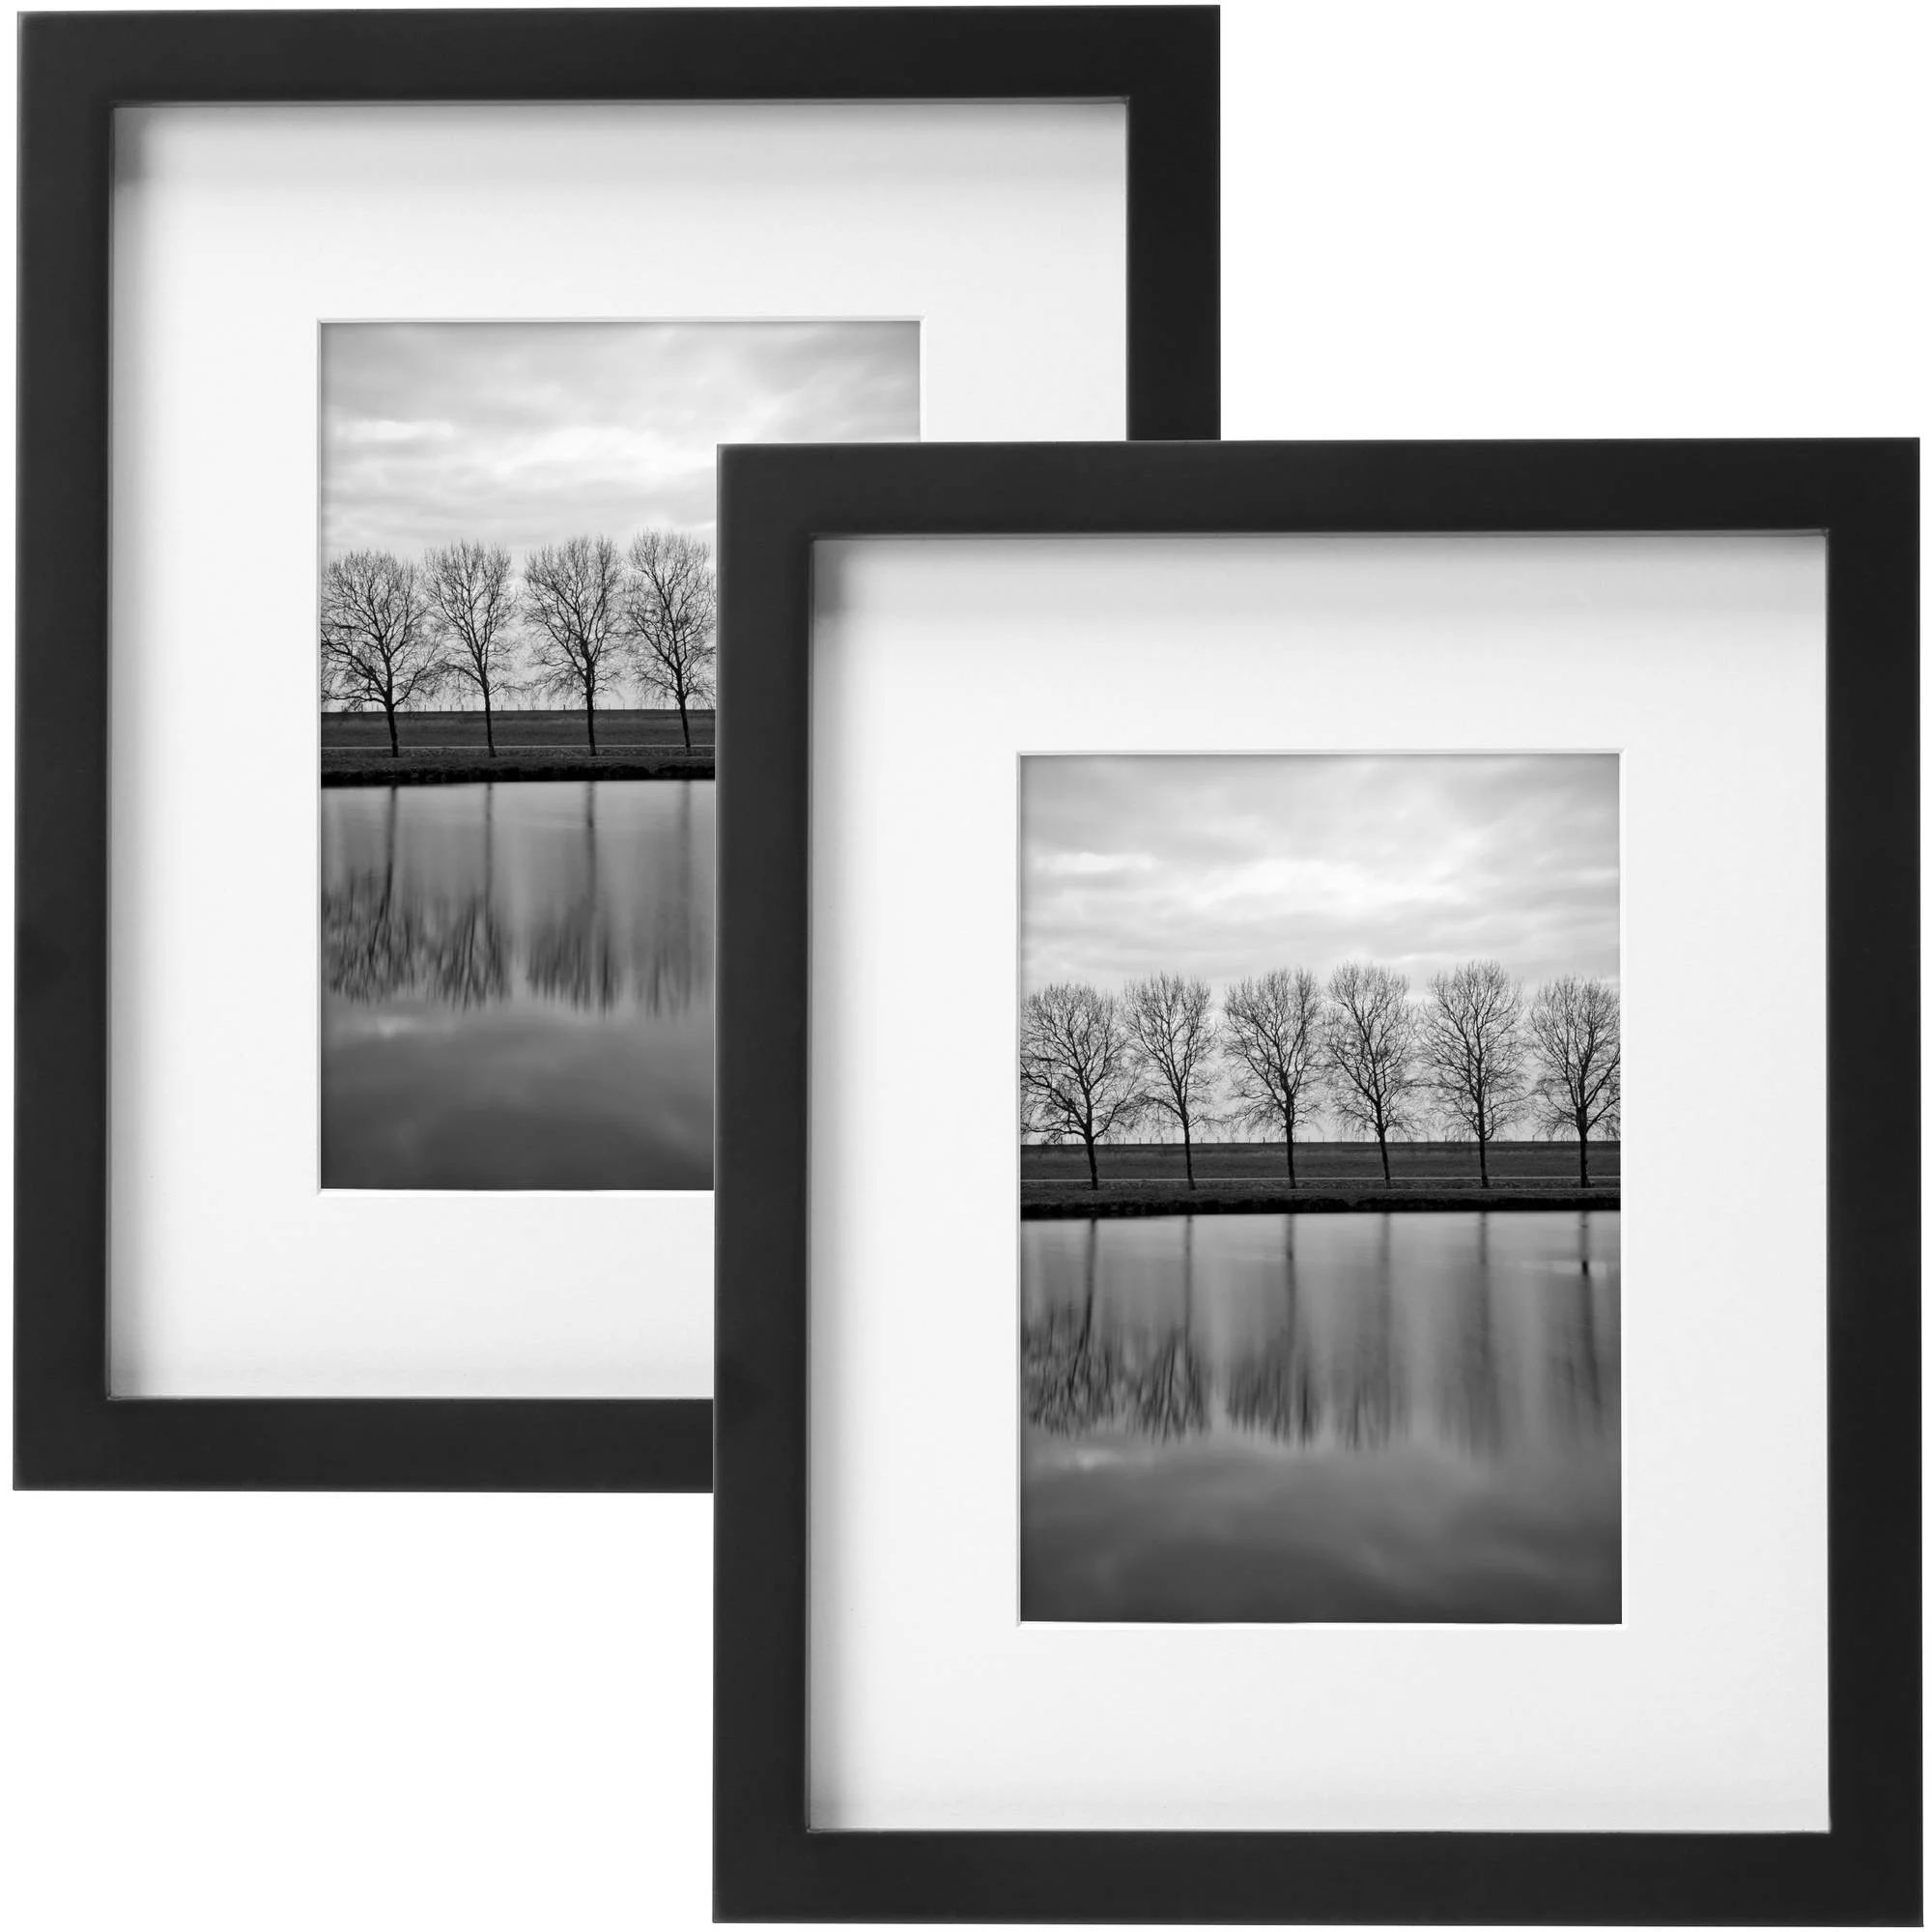 Better Homes & Gardens Gallery 8" x 10" Matted for 5" x 7" Wall Picture Frame, Black, Set of 2 | Walmart (US)